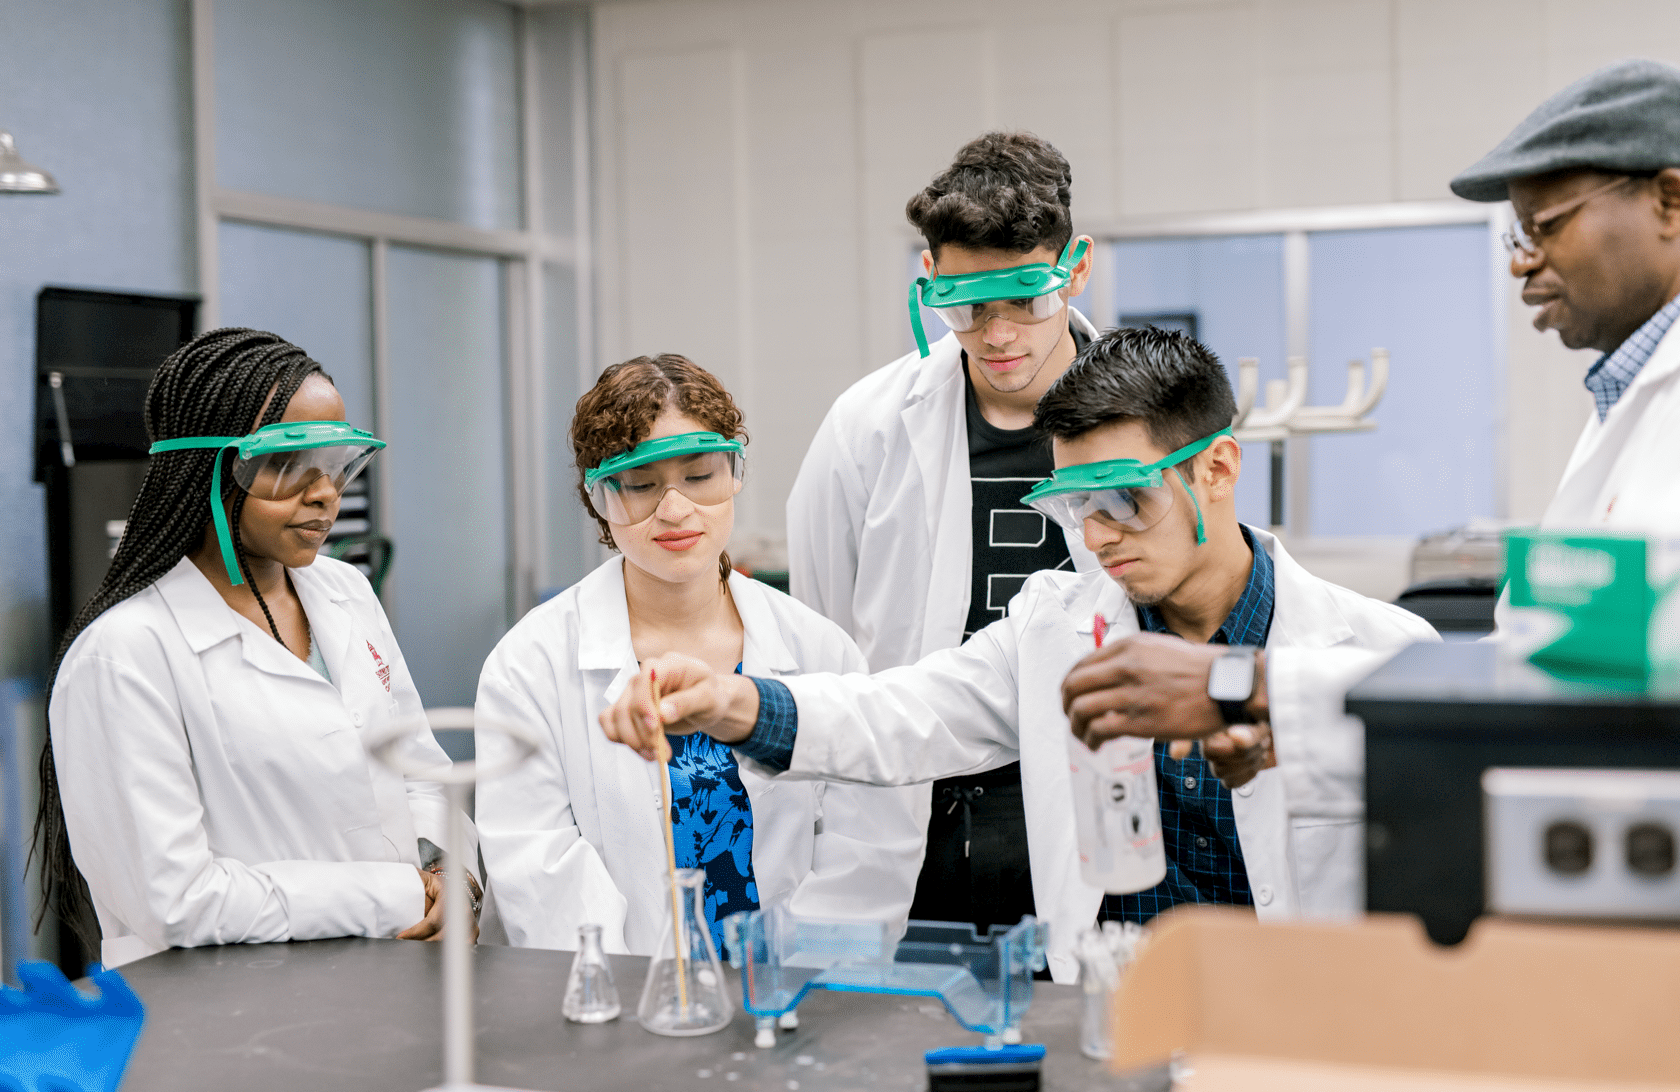 Groups of students with lab coats in lab doing an experiement with the professor